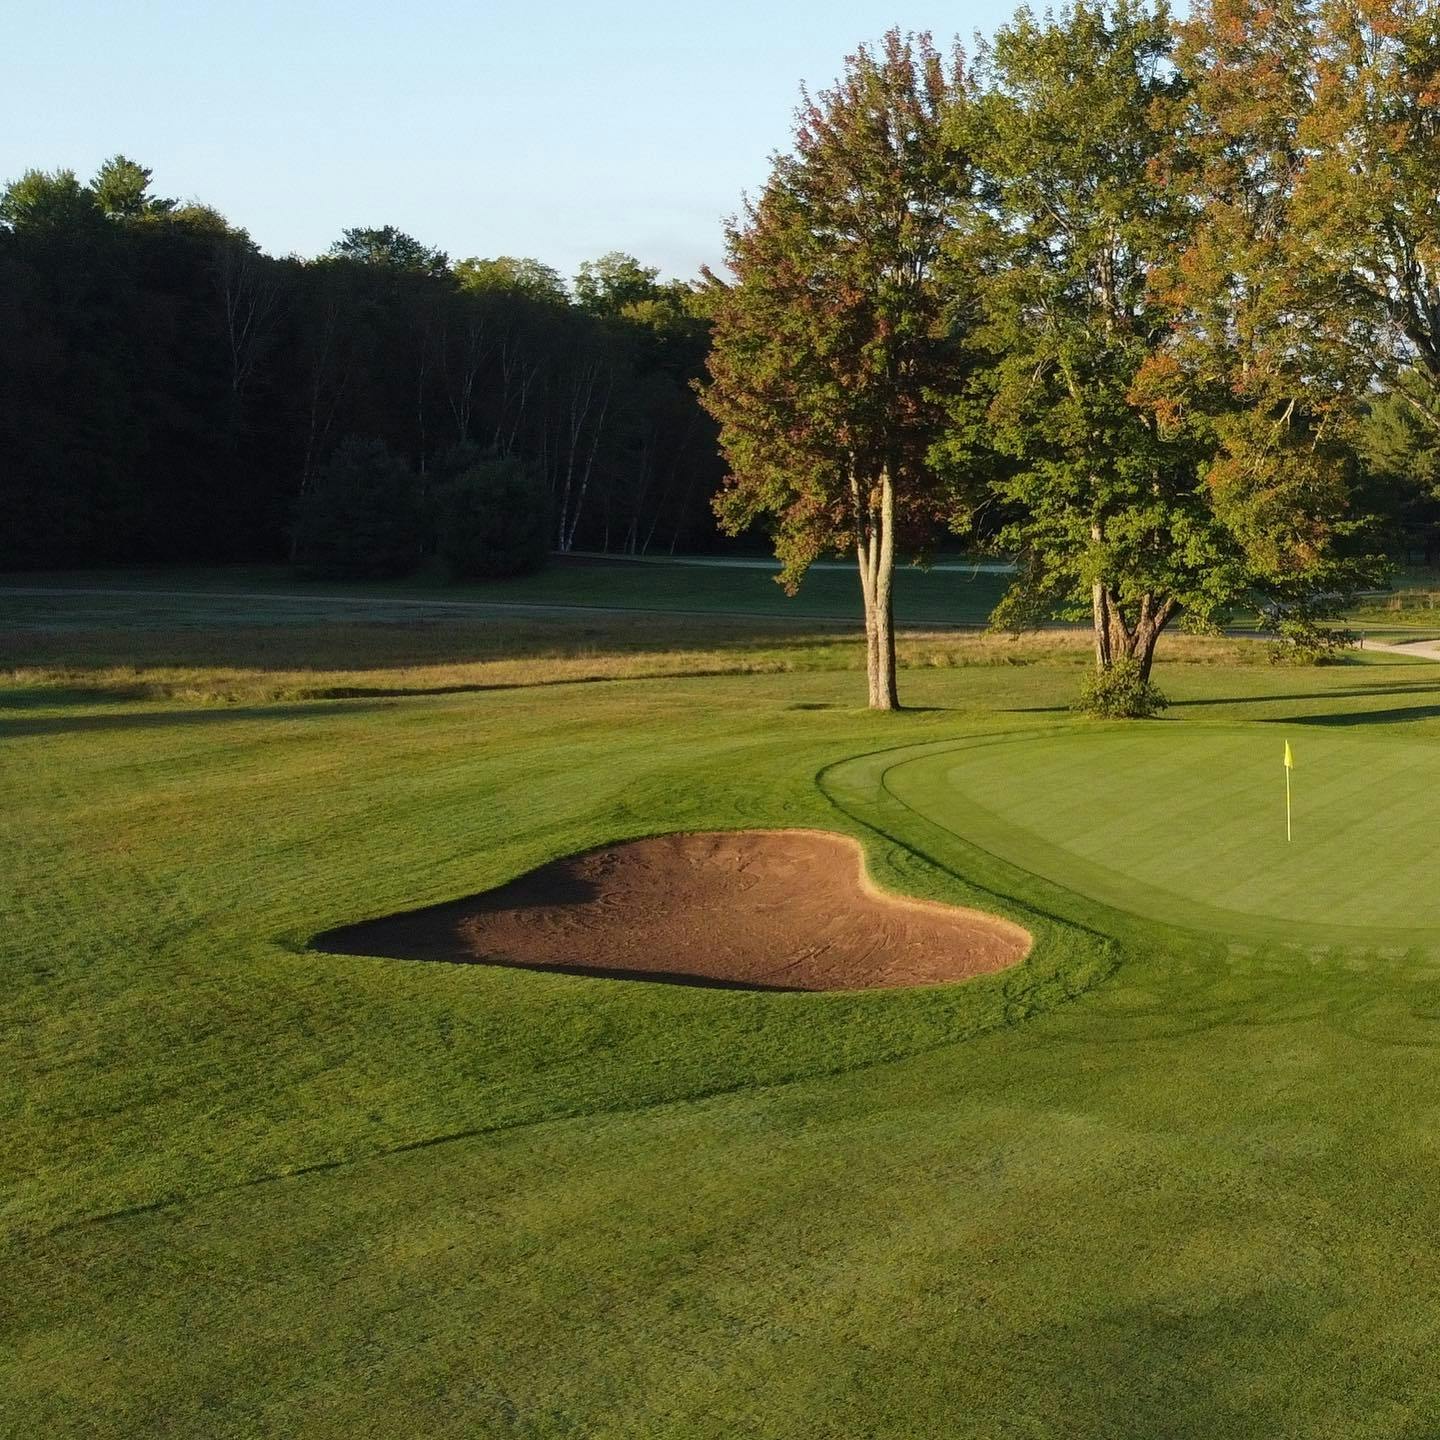 Originally beside the fairway bunker, 9 north green underwent a big move in 1968—125 yards back to its current spot. Kudos to architect Robbie Robinson for the new green, which was built as part of the south course construction. Pre-1968, it played as a 365-yard par 4 with a small square green. This hole was actually our opening hole for the first two years while the clubhouse was being built in the early 1950s. The original clubhouse was a small log cabin beside the yellow tees on 9. #LSGHistory #PlayTheLake